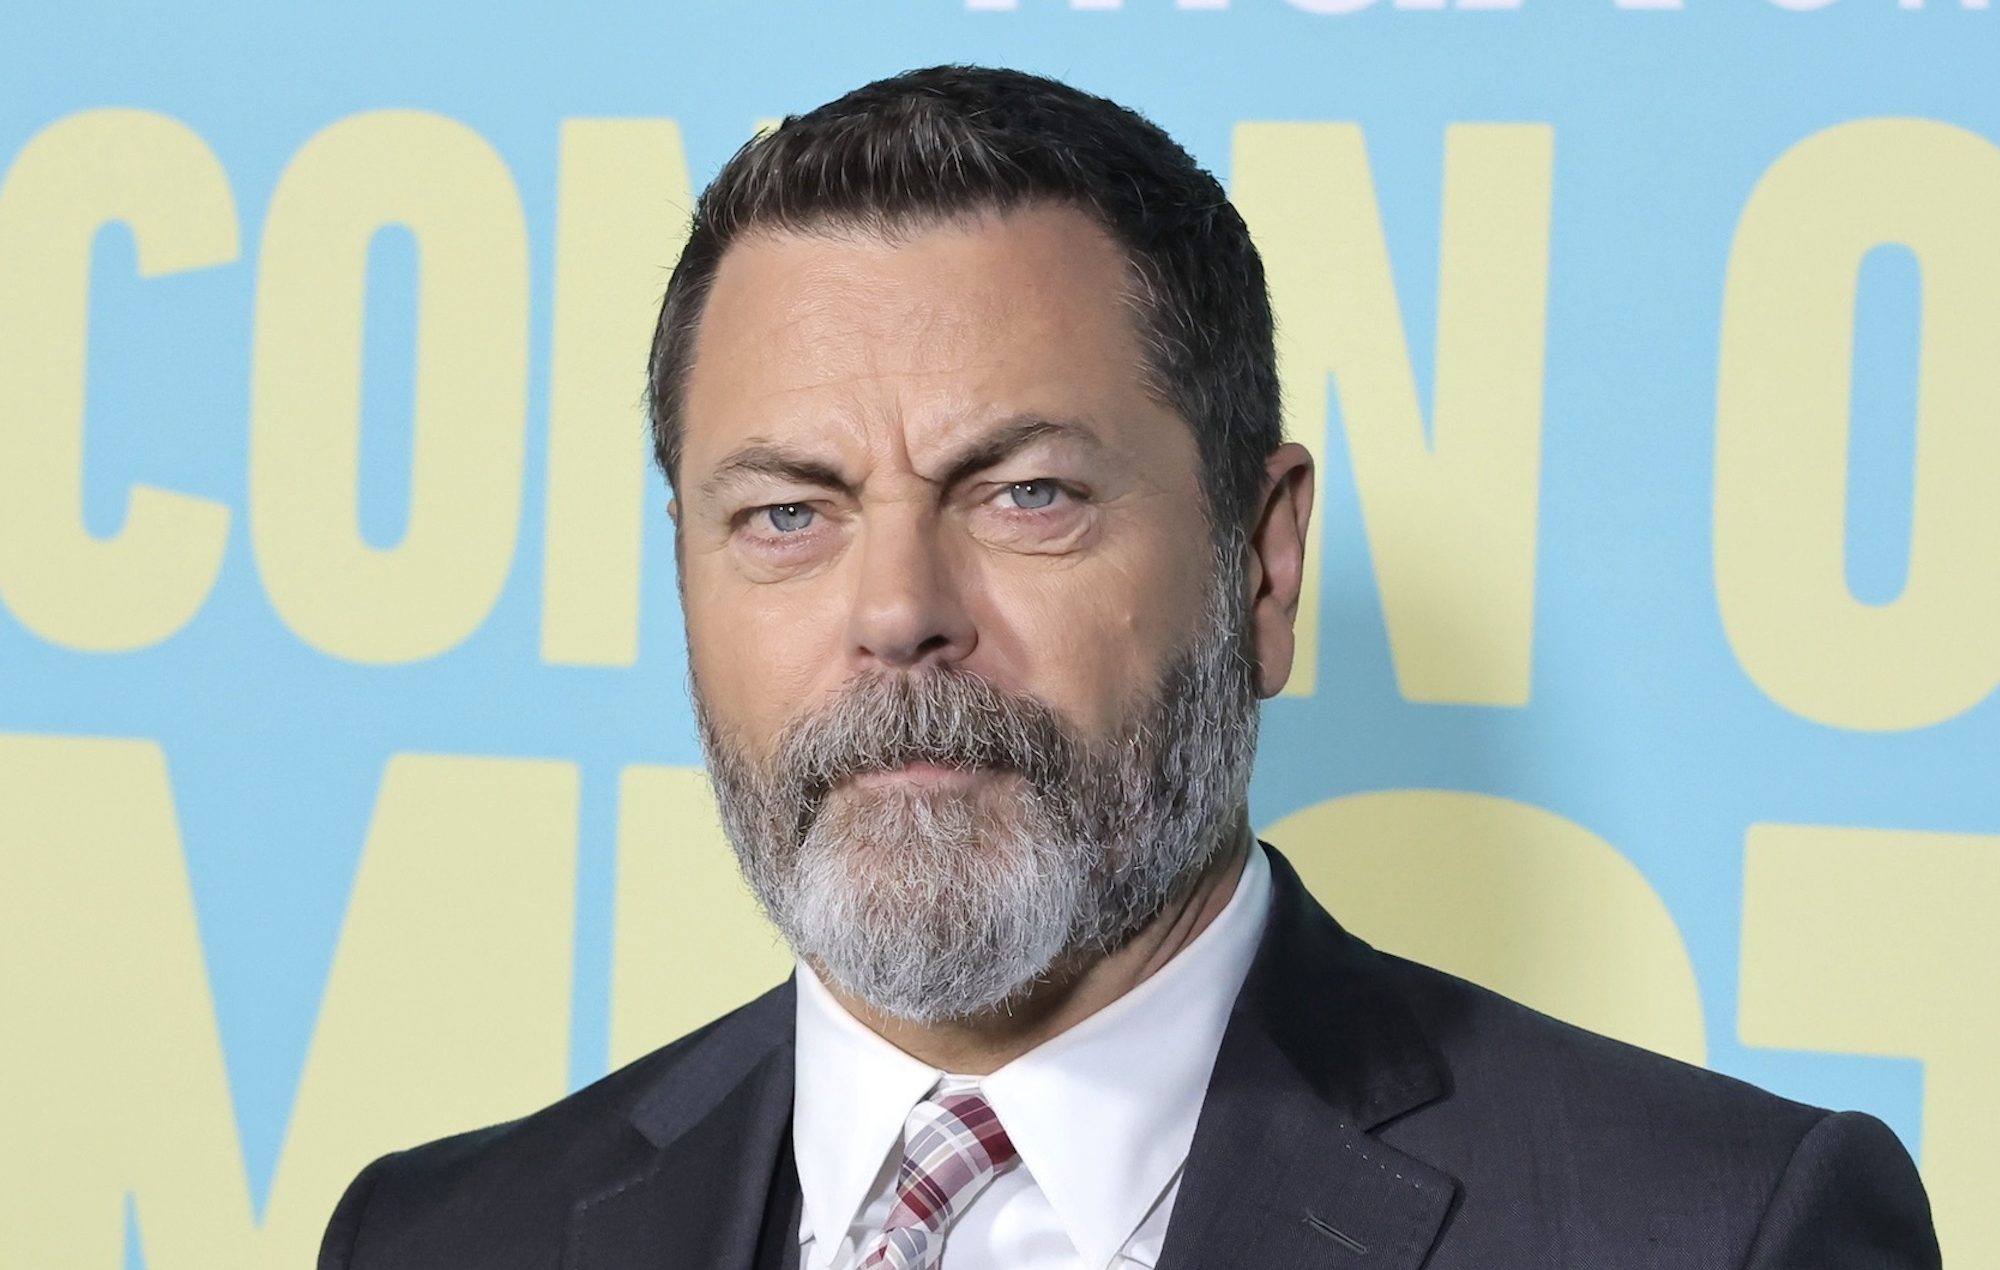 Nick Offerman reveals he spent a “whole night” in prison as a teenager